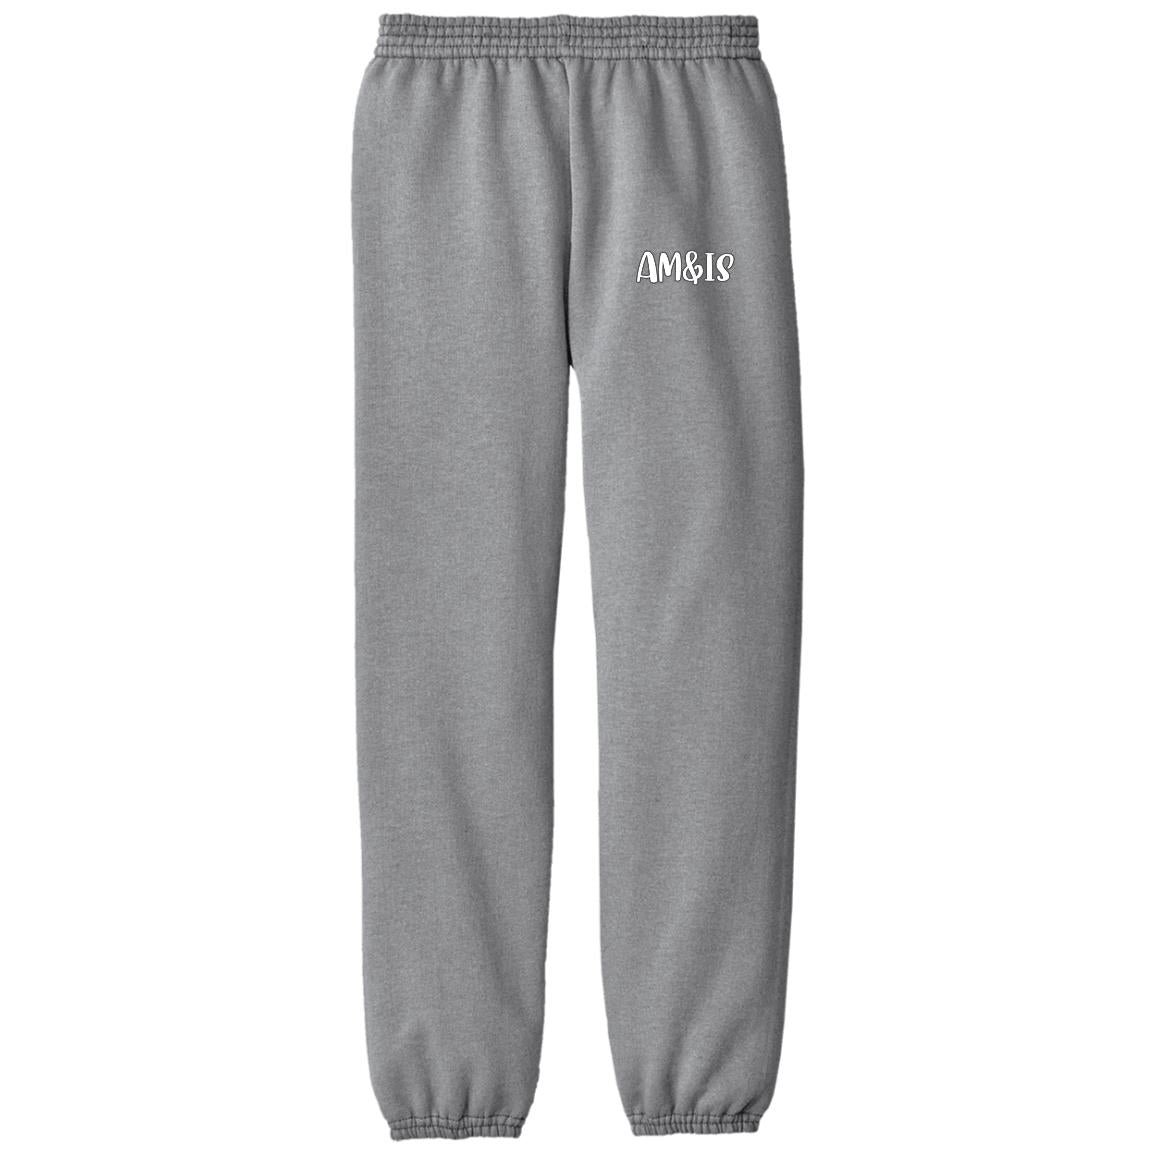 ATHLETIC HEATHER AM&IS Activewear Youth Fleece Pants - kid's sweatpants at TFC&H Co.